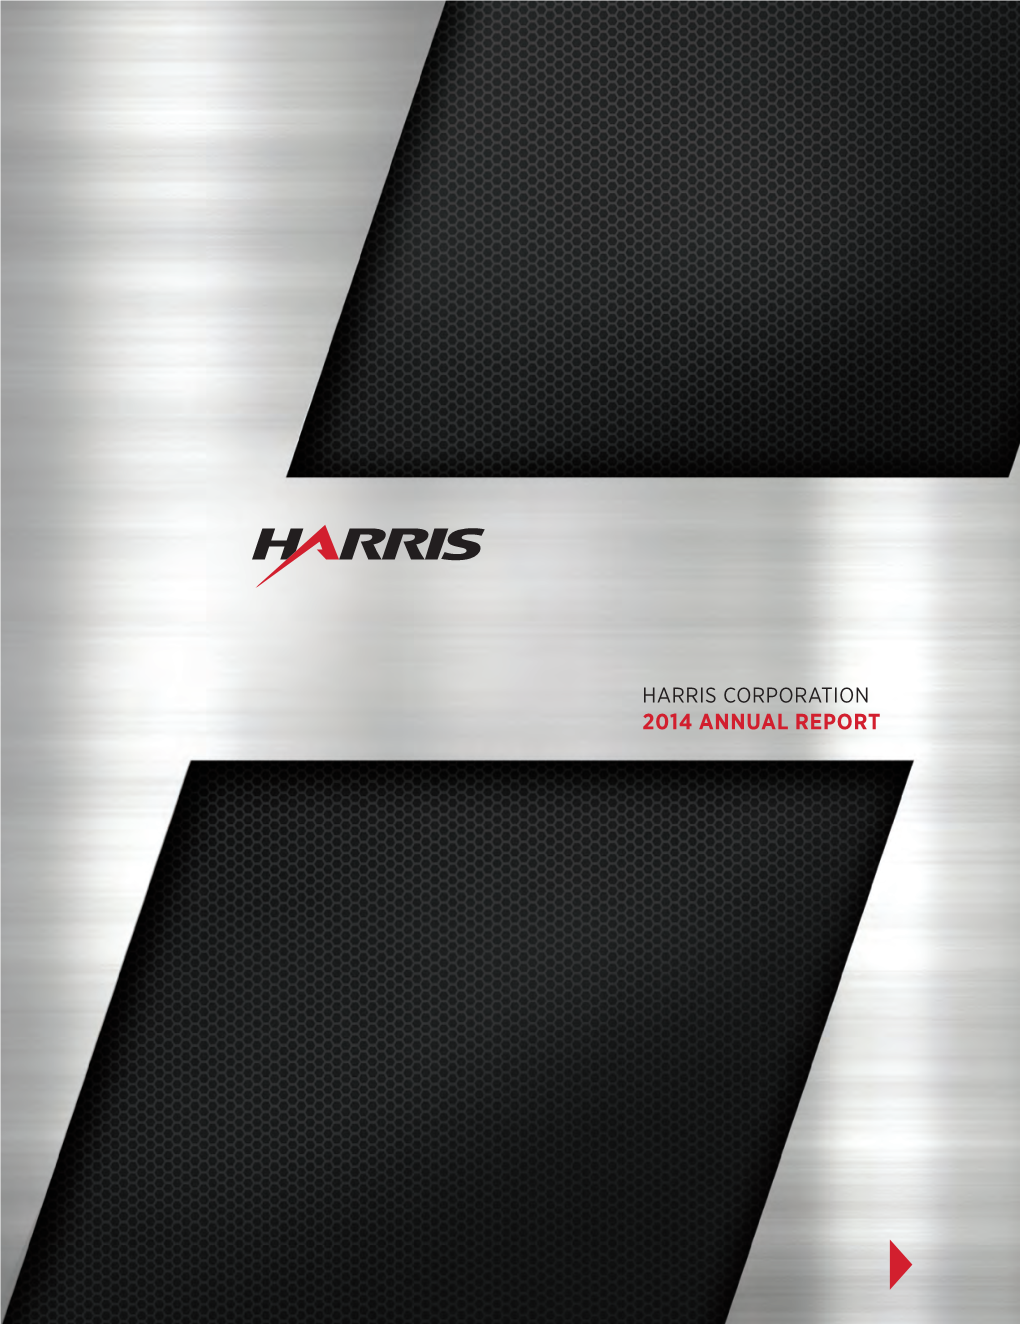 Harris Corporation 2014 Annual Report Financial Highlights